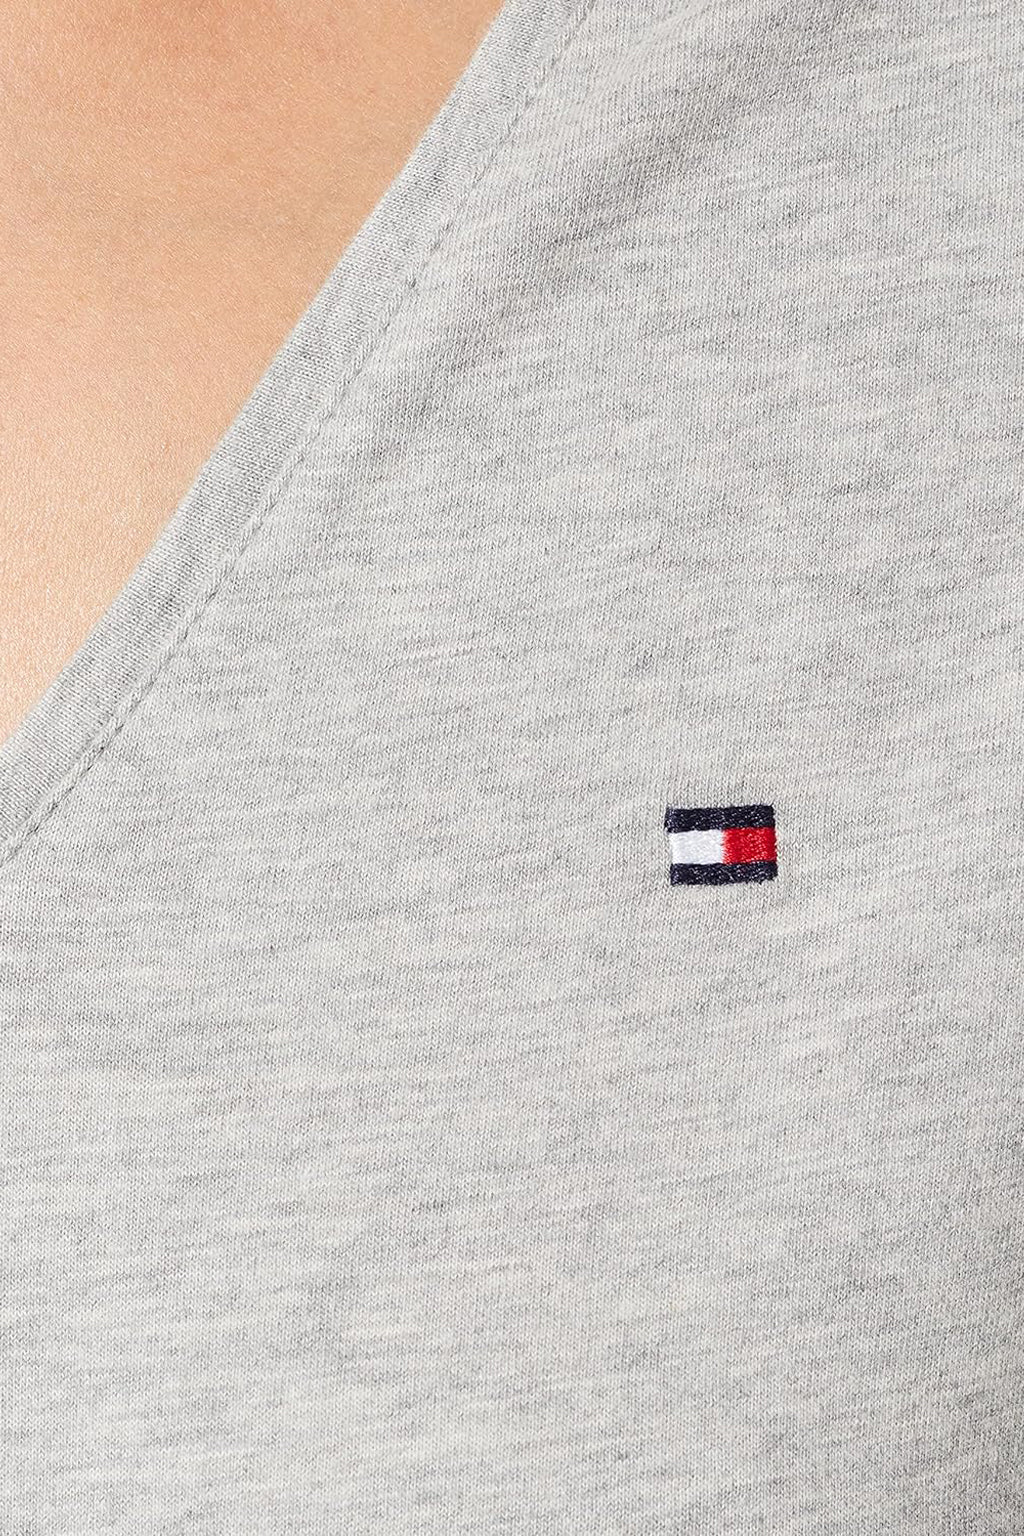 Tommy Hilfiger - New Lucy T-Shirt